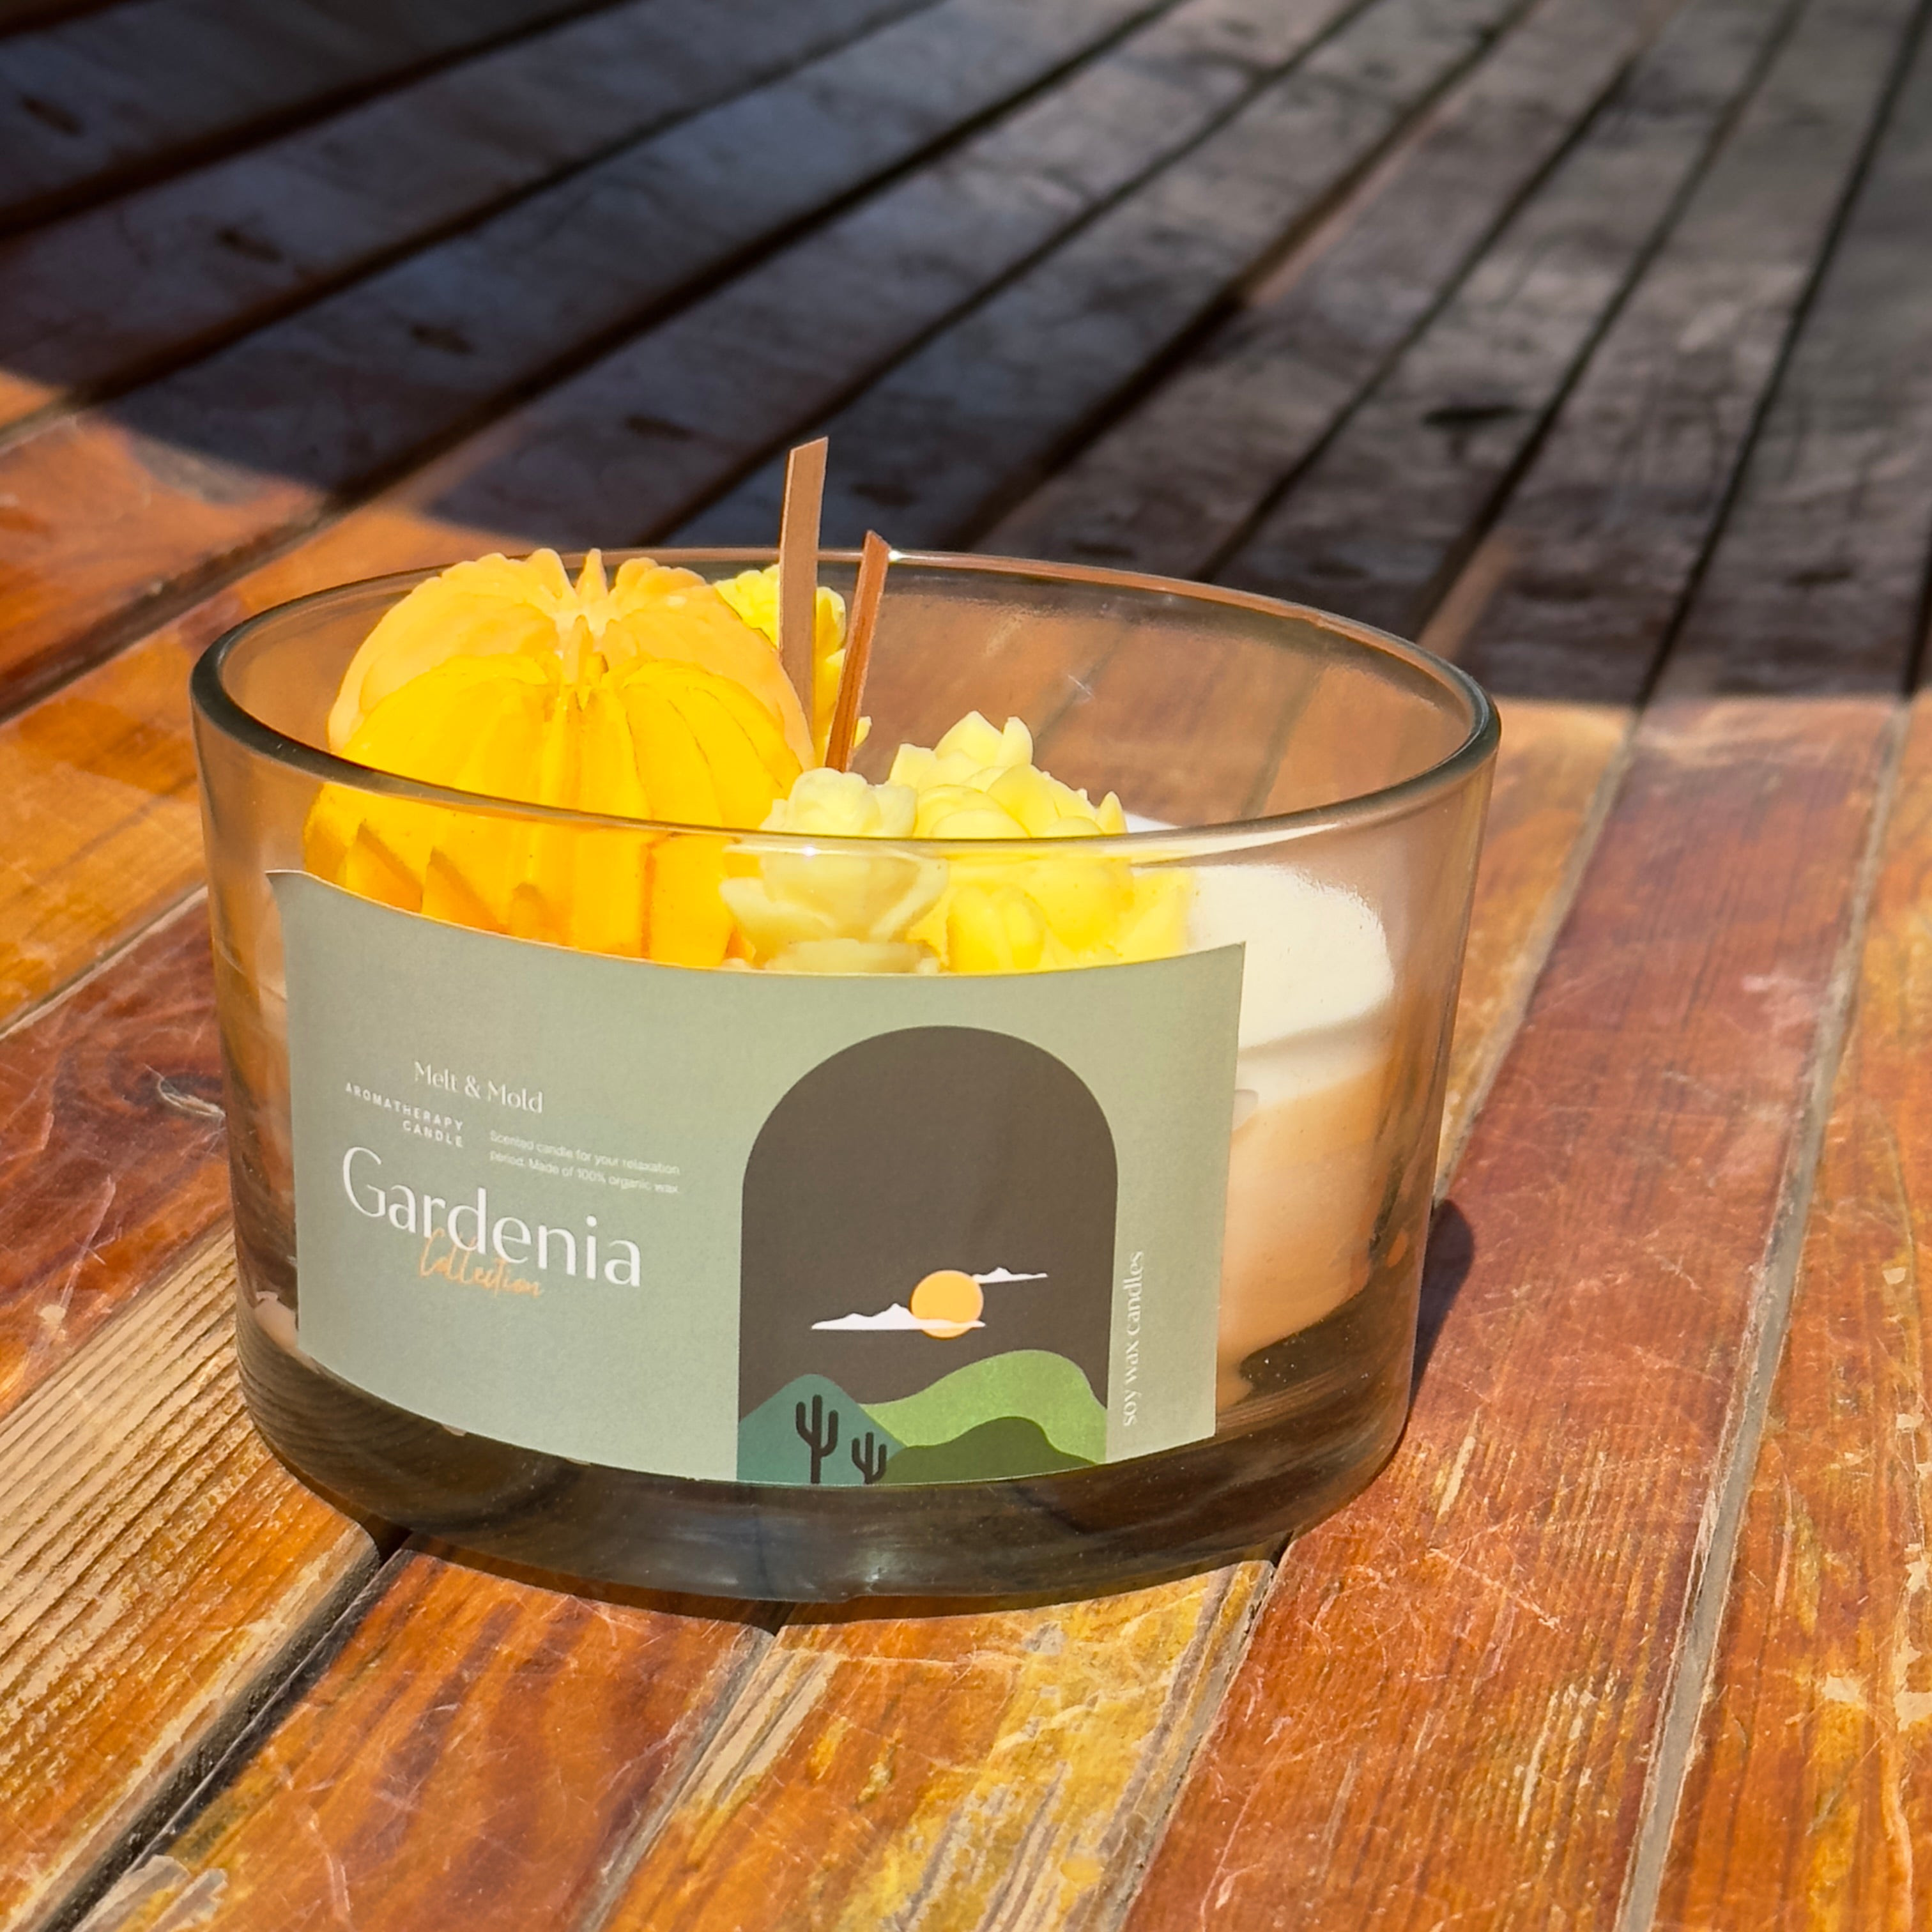 Gardenia (our version) Sample Scent Strip — Stone Candles